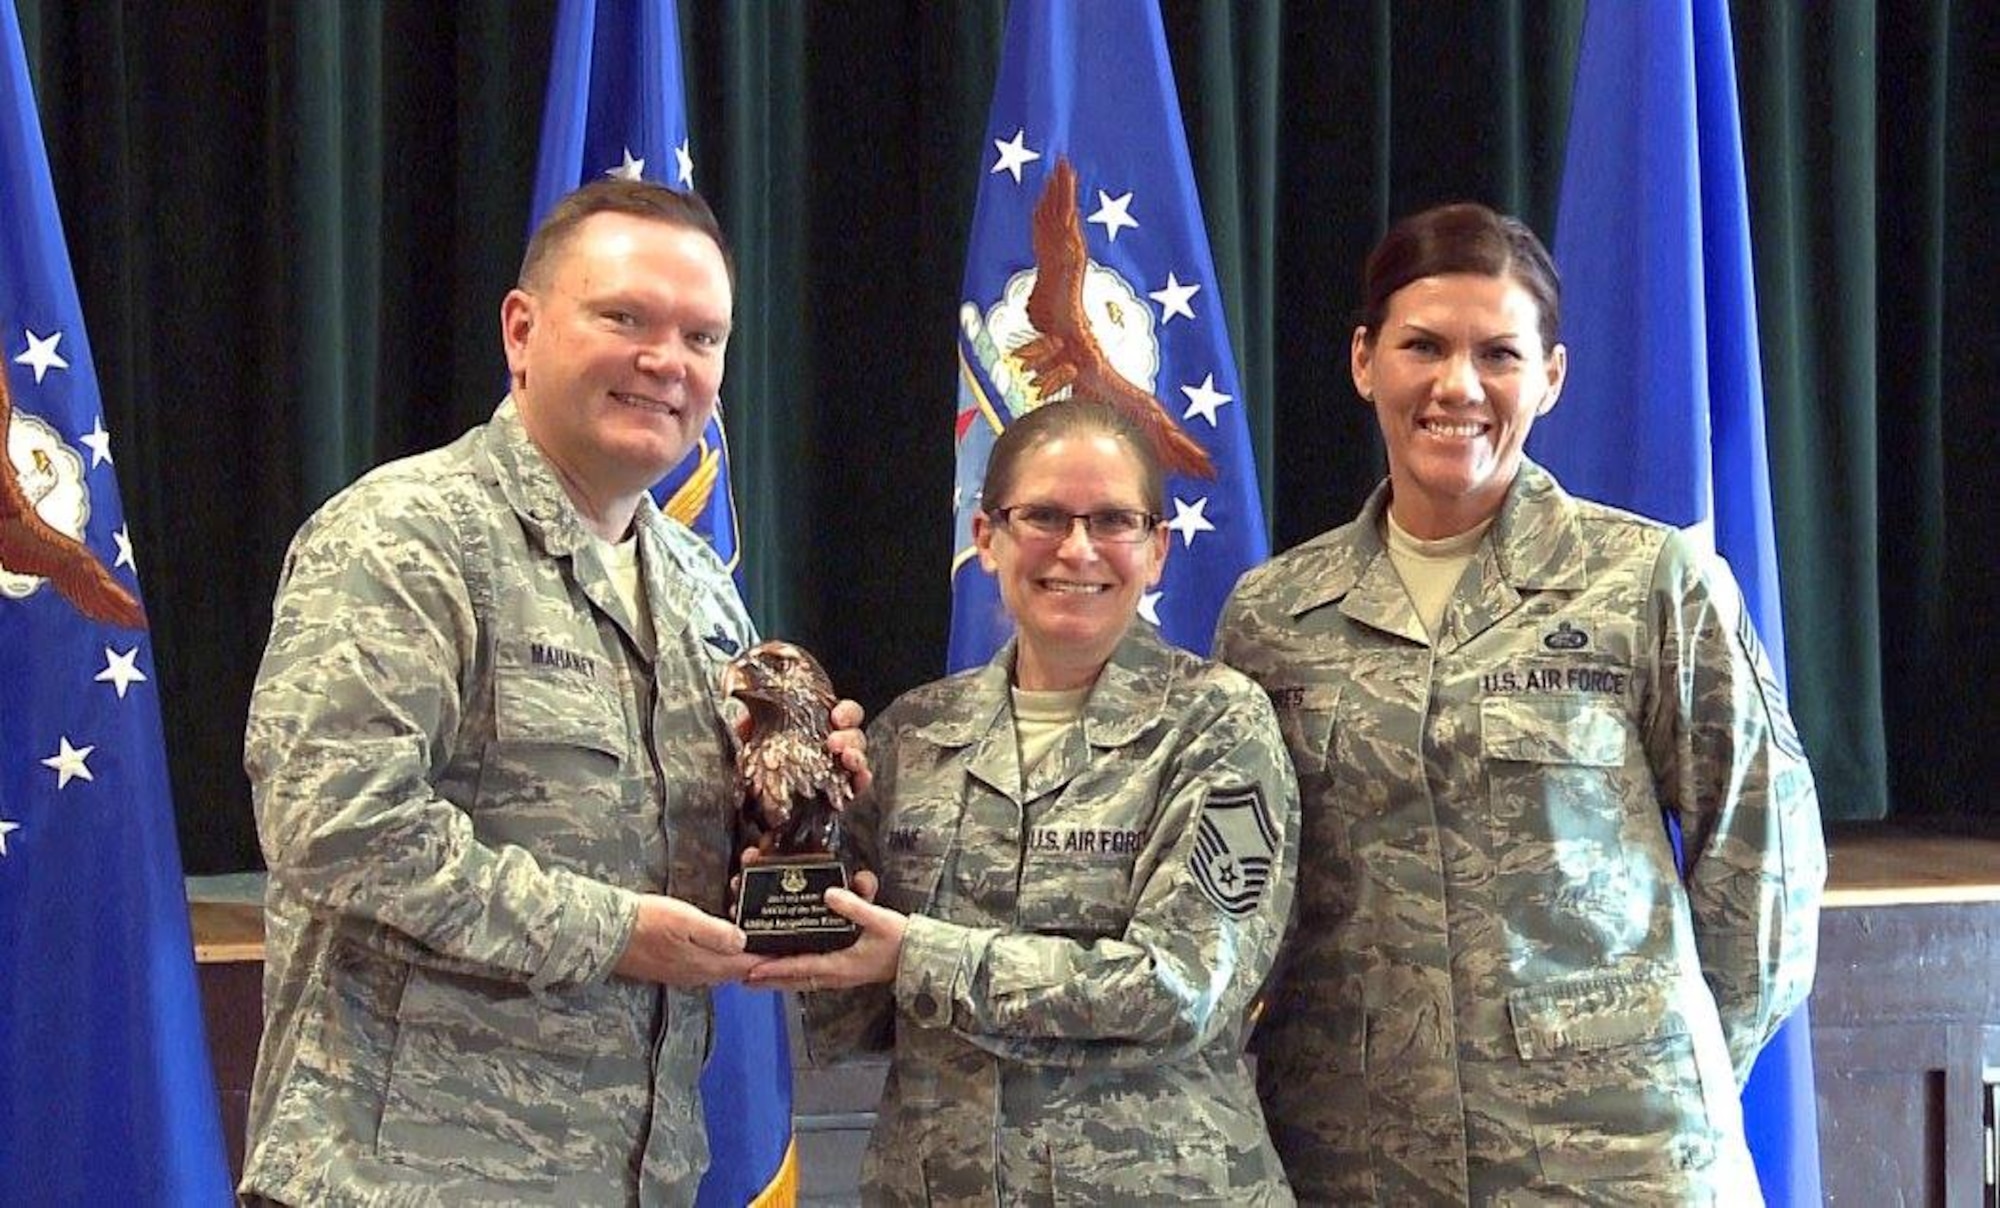 Brig. Gen. Samuel “Bo” Mahaney, Air Reserve Personnel Center commander, and Chief Master Sgt. Ruthe Flores, ARPC command chief, present the ARPC Senior Noncommissioned Officer of the Year award to Senior Master Sgt. Jacqueline Rinne. Mahaney honored ARPC’s 2015 outstanding performers of the year Feb. 16, 2016, at the Heritage Eagle Bend Country Club in Aurora, Colo. (U.S. Air Force photo/Quinn Jacobson)